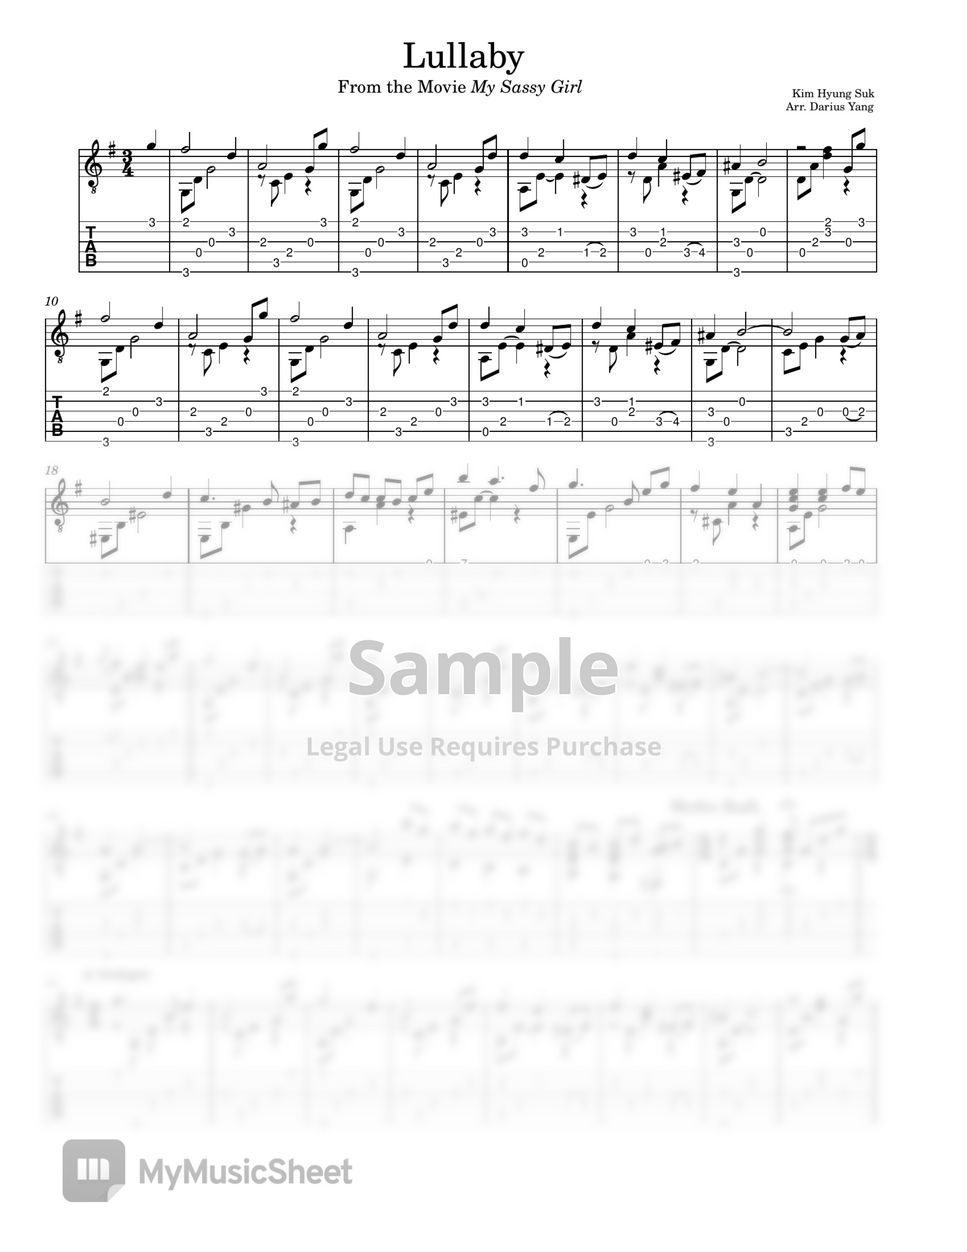 ACE - Lullaby (My Sassy GIrl OST) Sheets by Darius Yang